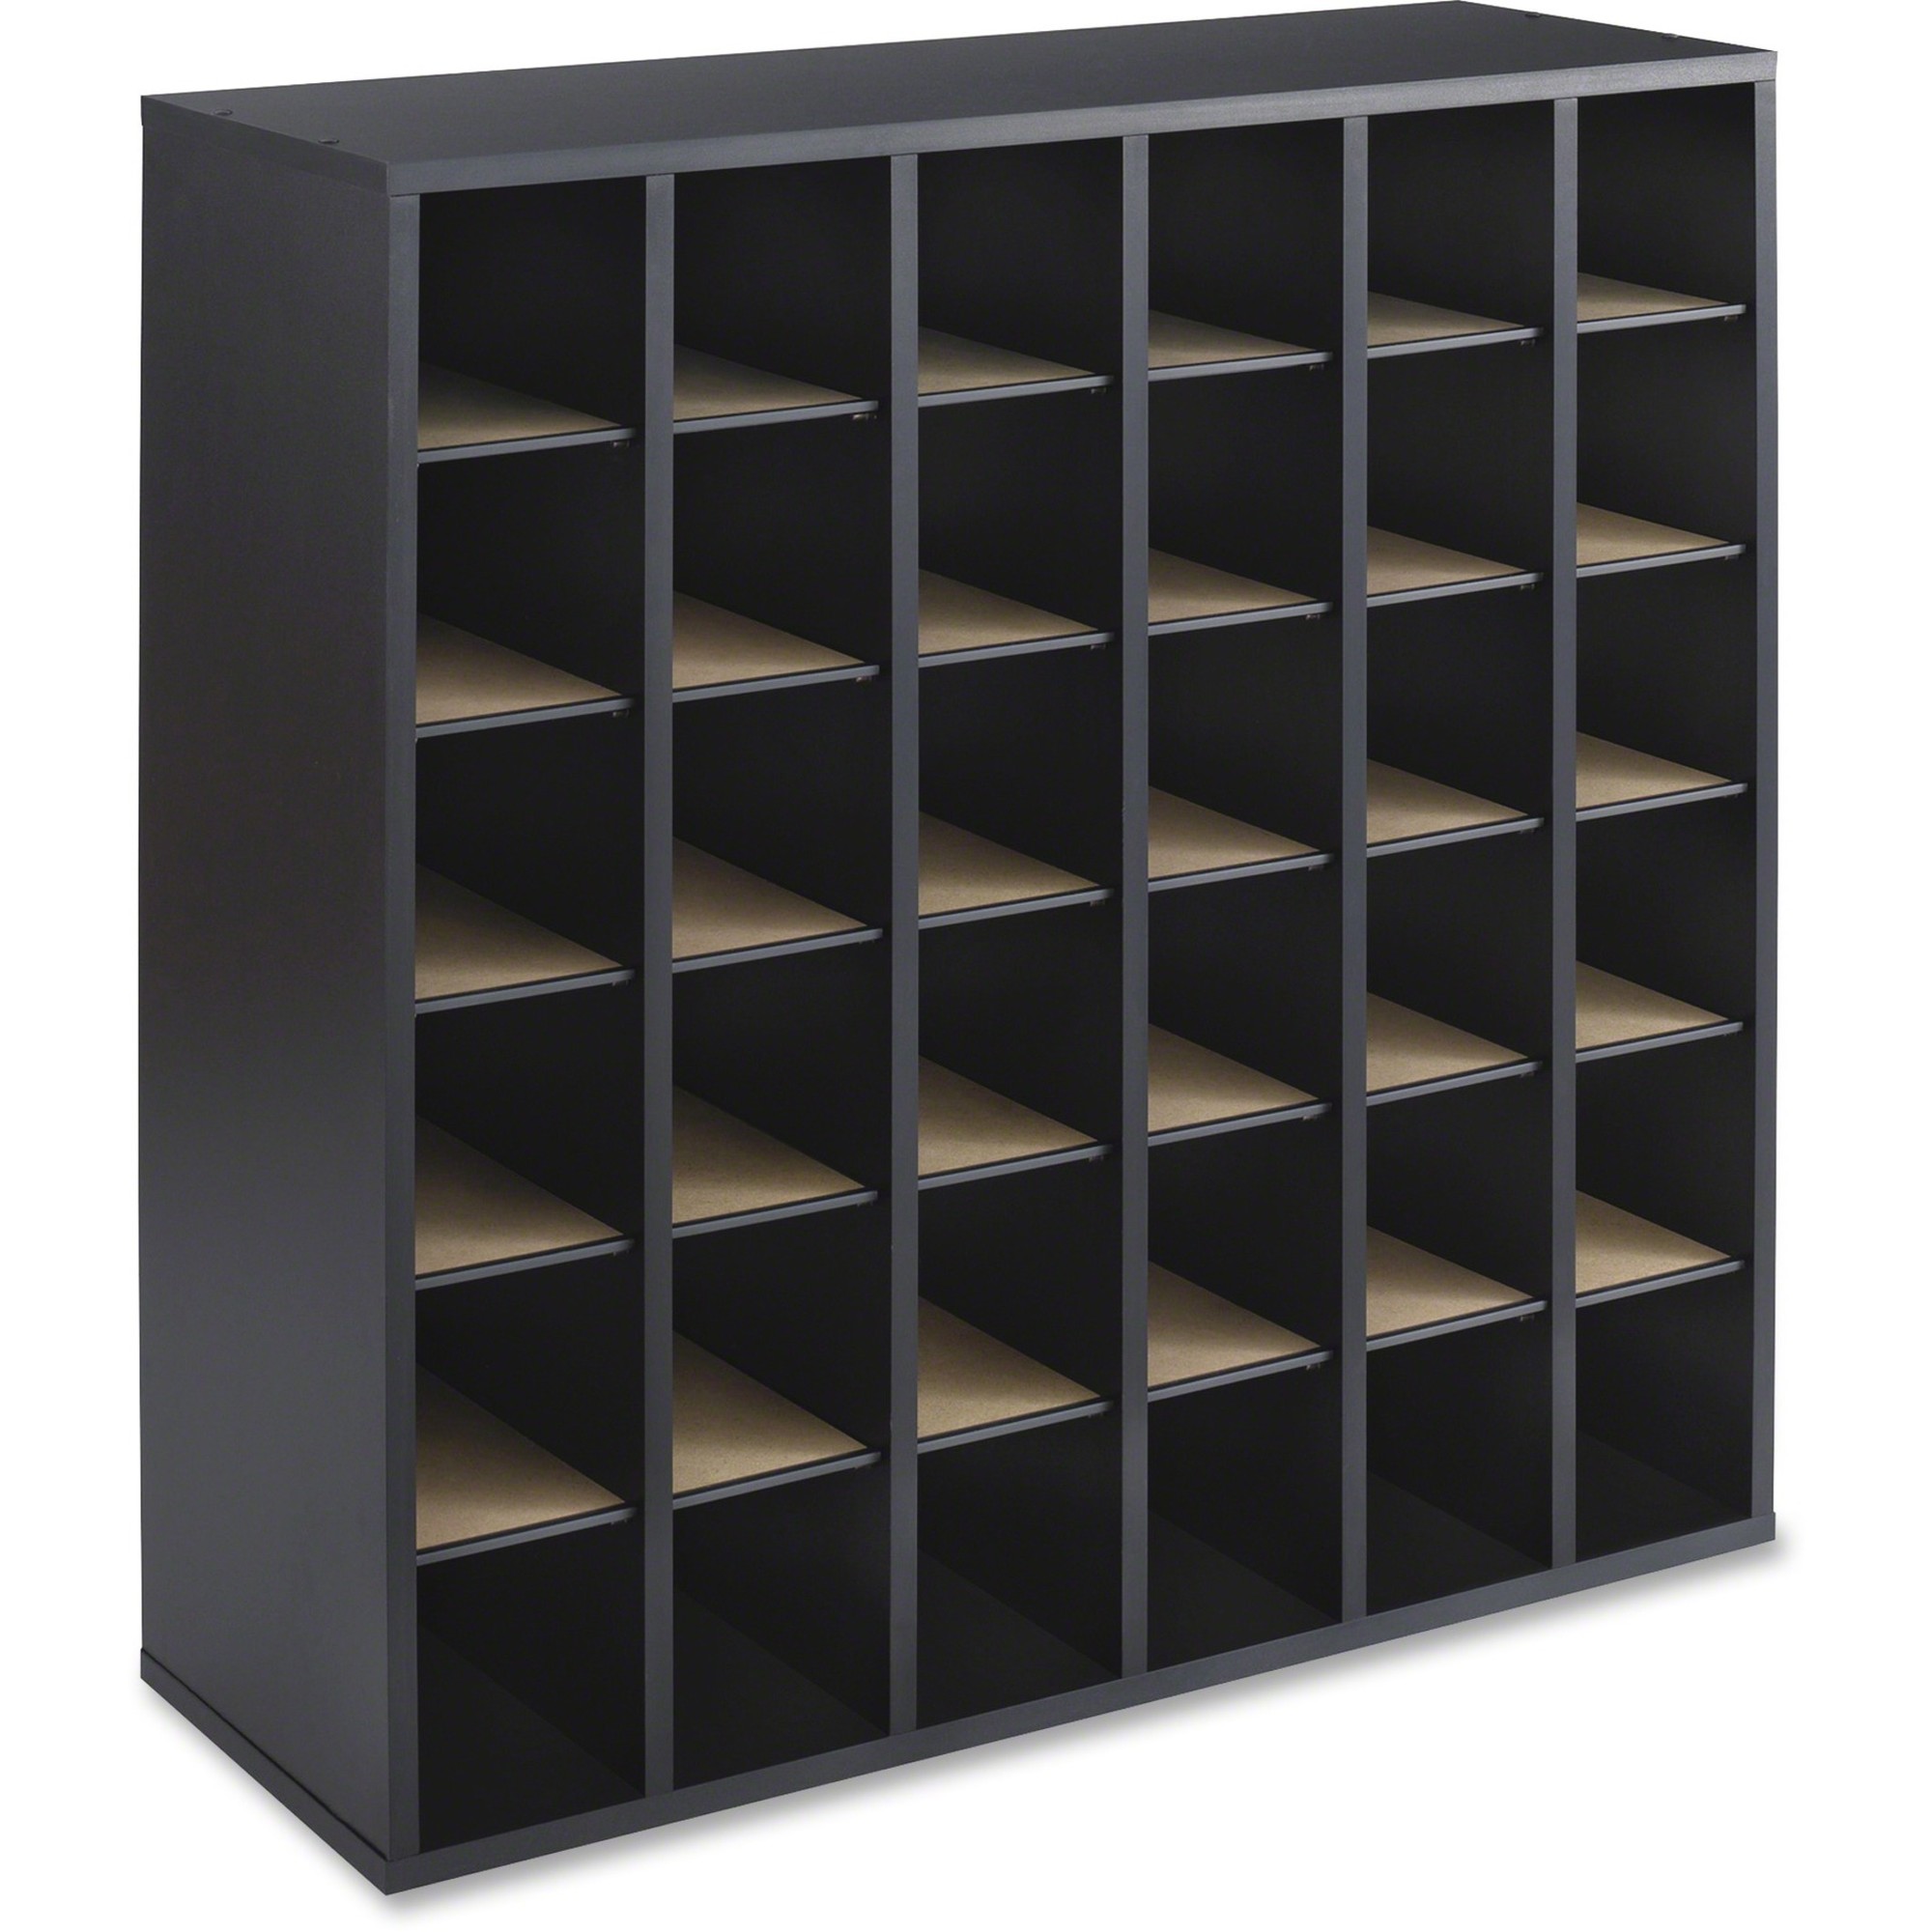 Wood Mail Sorter with Adjustable Dividers, Stackable, 36 Compartments, 33.75 x 12 x 32.75, Black